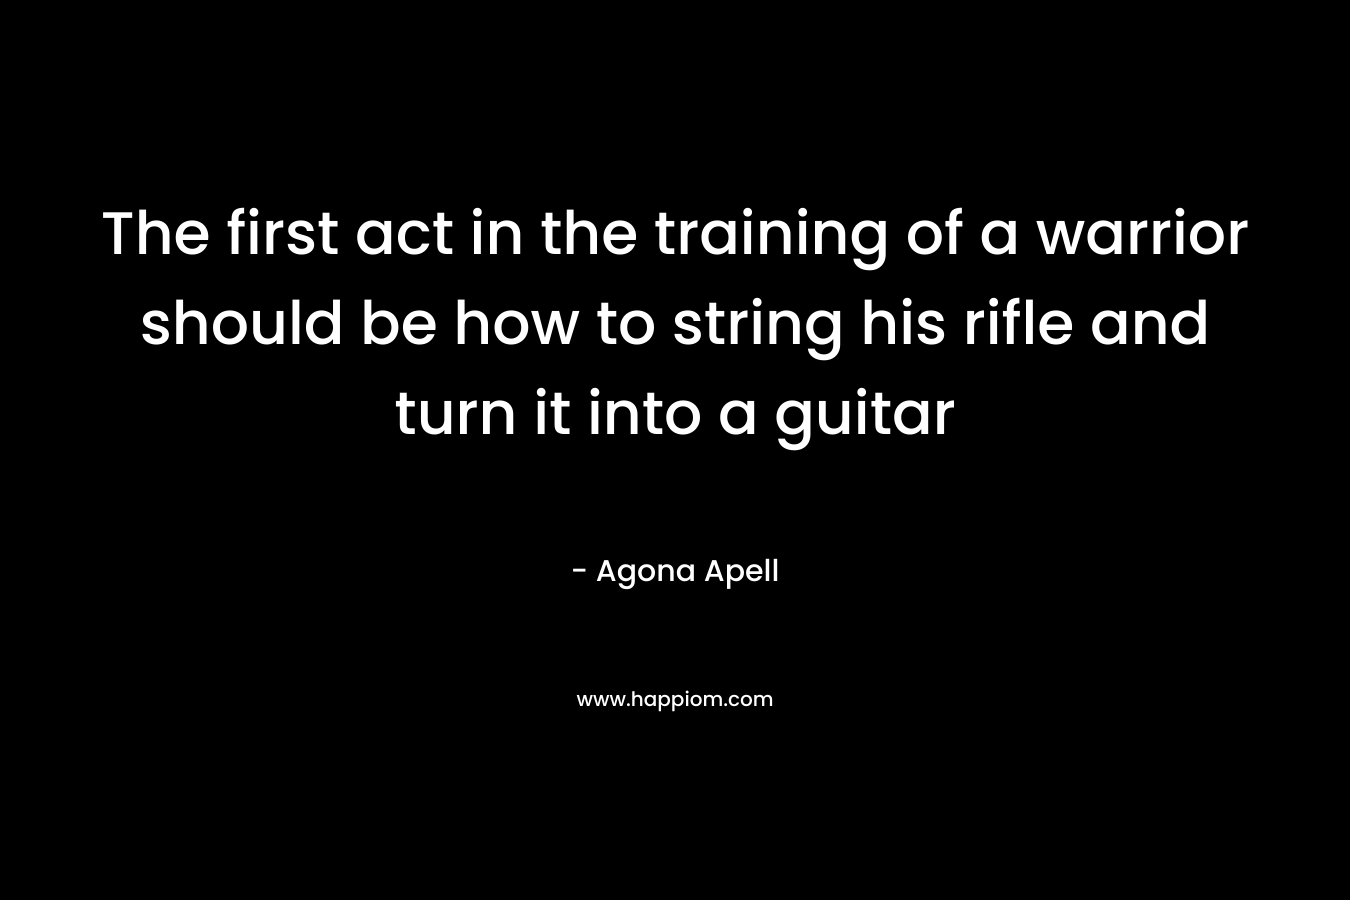 The first act in the training of a warrior should be how to string his rifle and turn it into a guitar